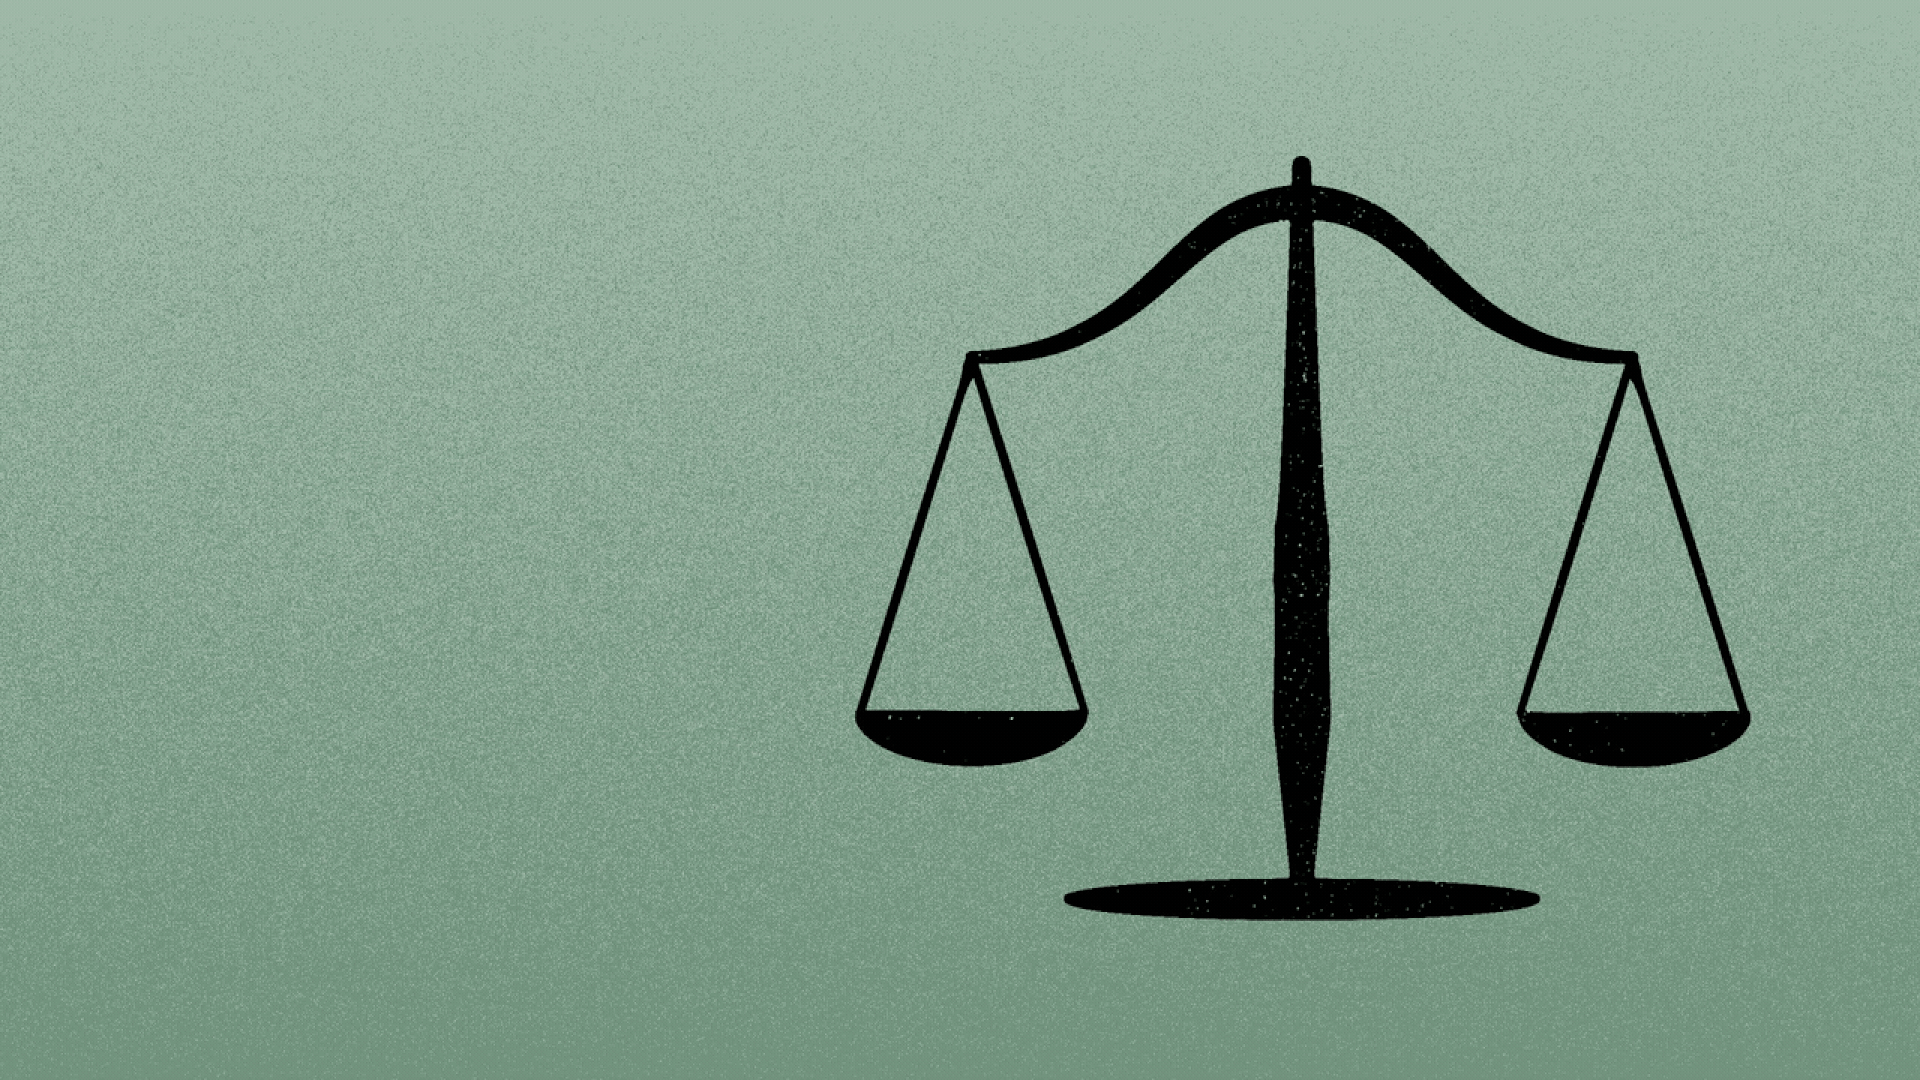 An animated illustration of the scales of justice